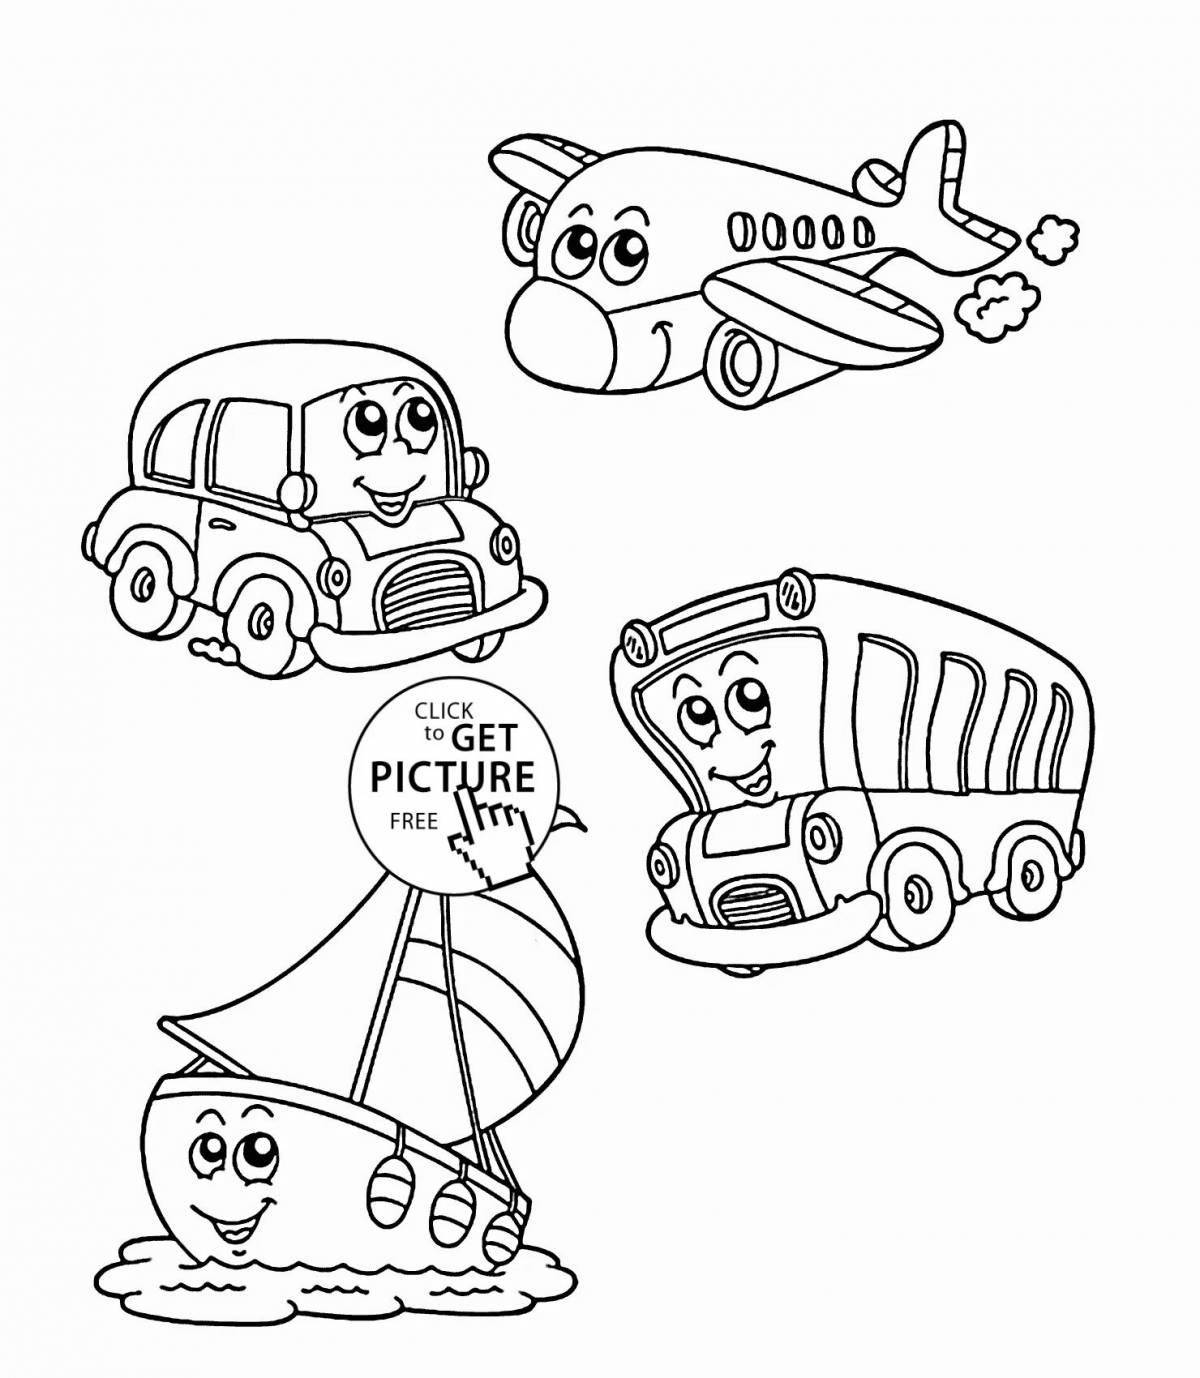 Colorful coloring for preschoolers modes of transport